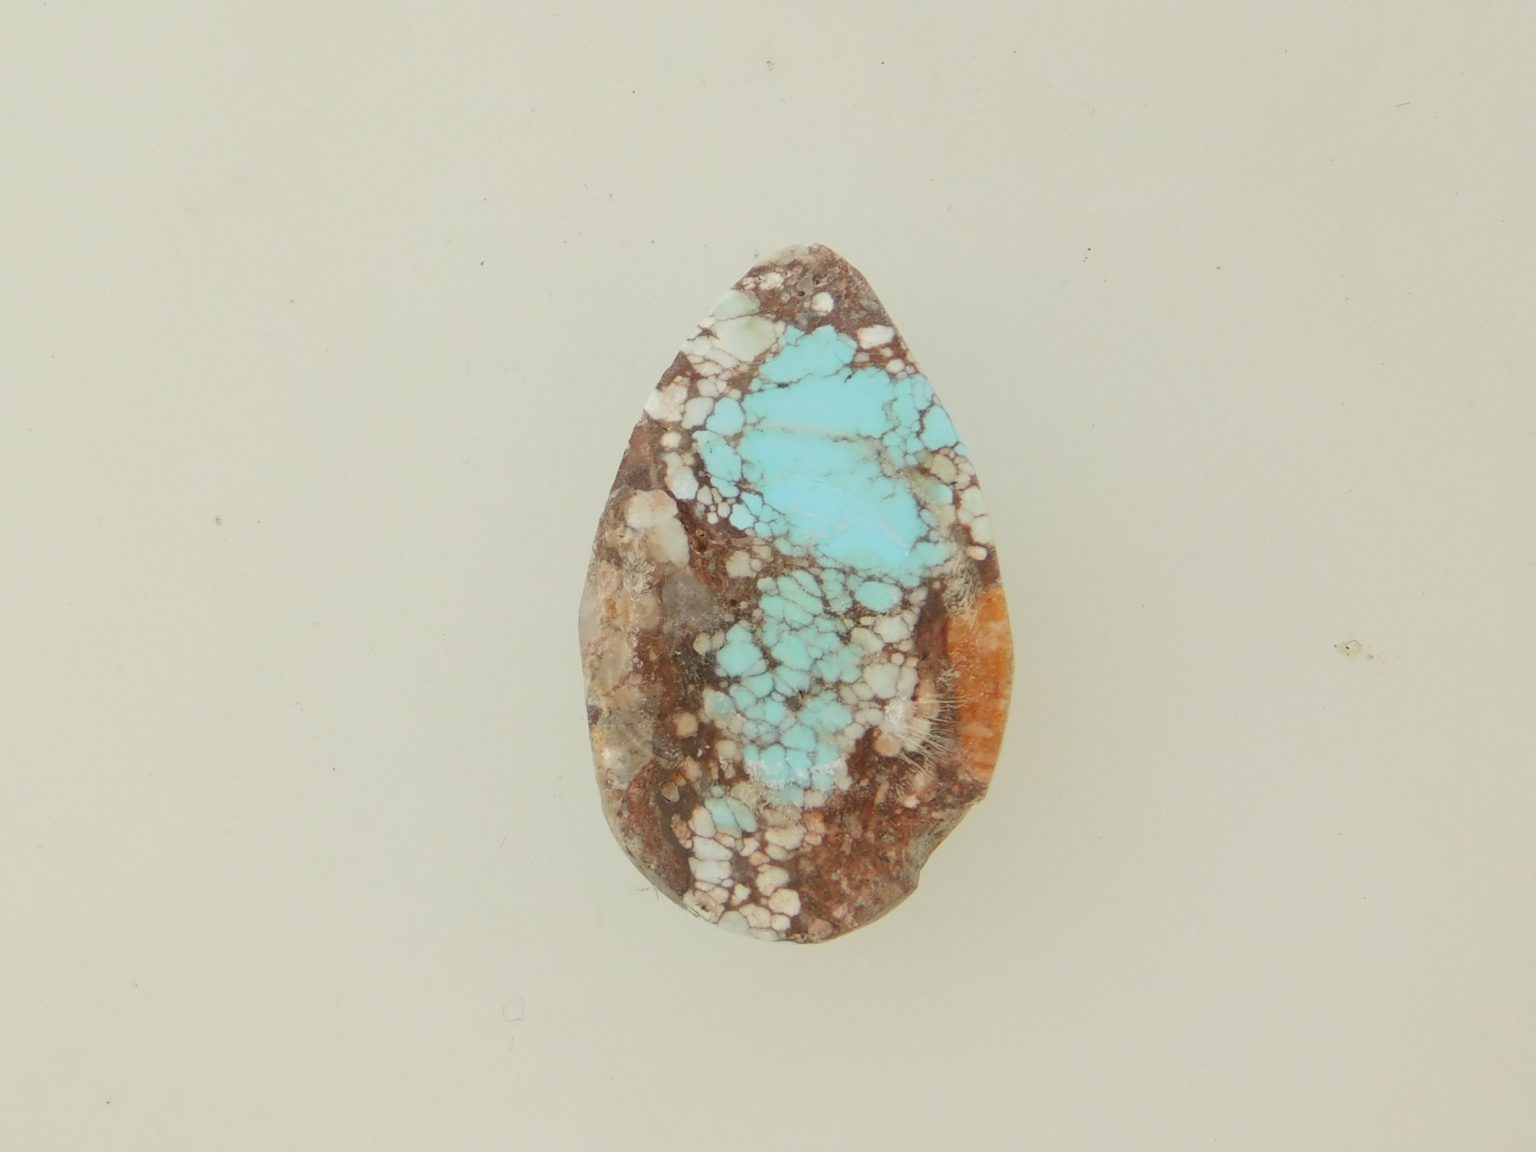 MEDIUM BLUE BISBEE TURQUOISE with light host 15.5 carats Reverse View